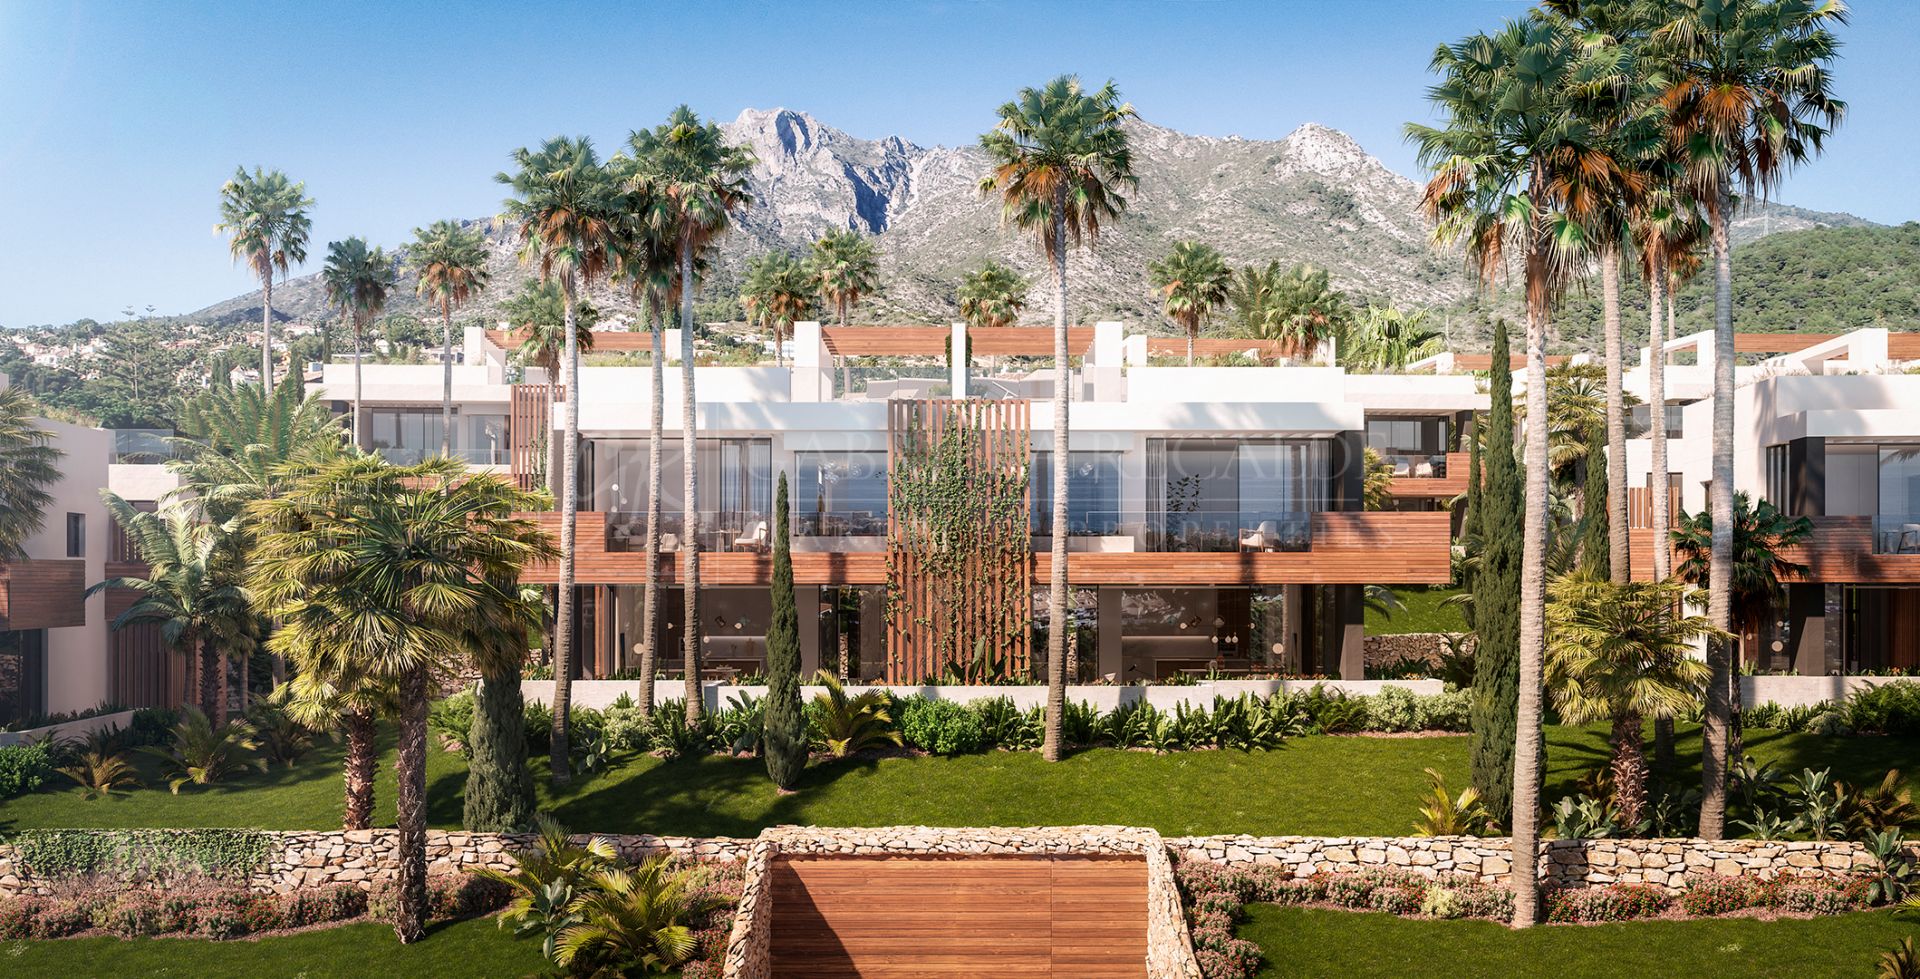 Semi-detached homes in Sierra Blanca with many customisation options